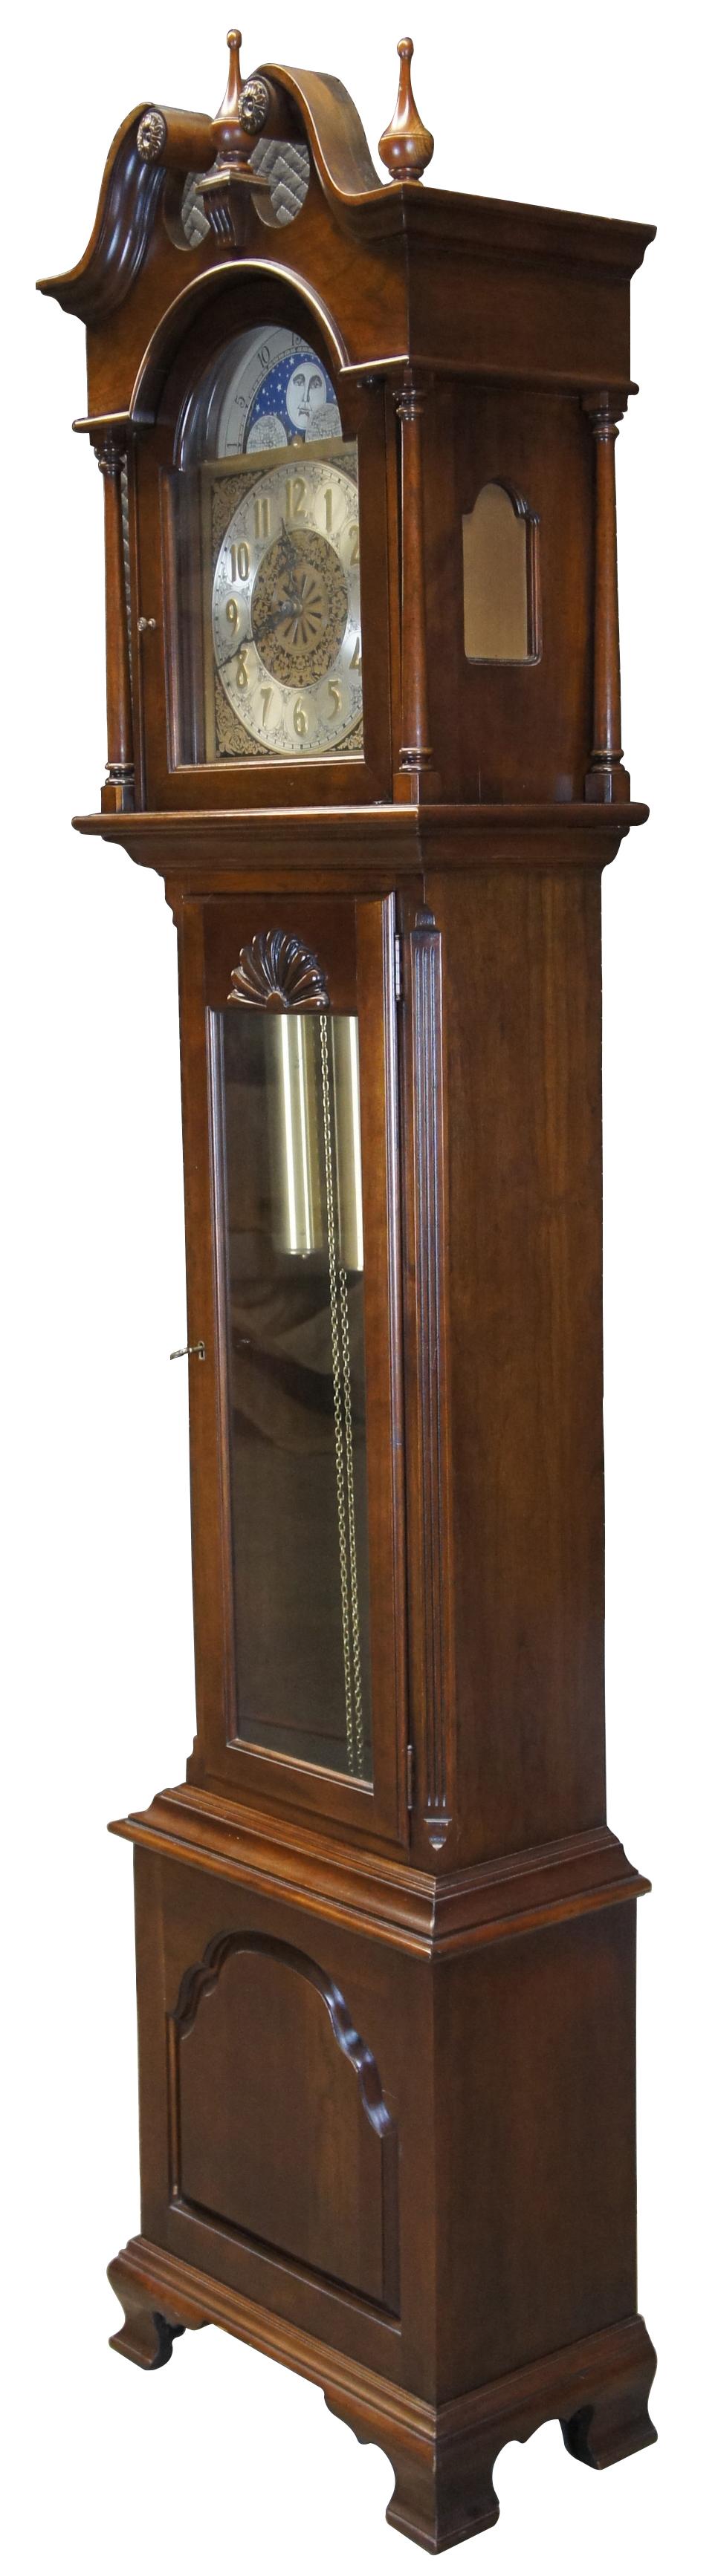 Ethan Allen Georgian Court grandfather clock, circa 1970s. Model number 08-3805; 225 finish. Features a cherry tall case with scrolled open pediment, 3 finials, turned posts and bracket feet. West German works with an ornately detailed face and moon